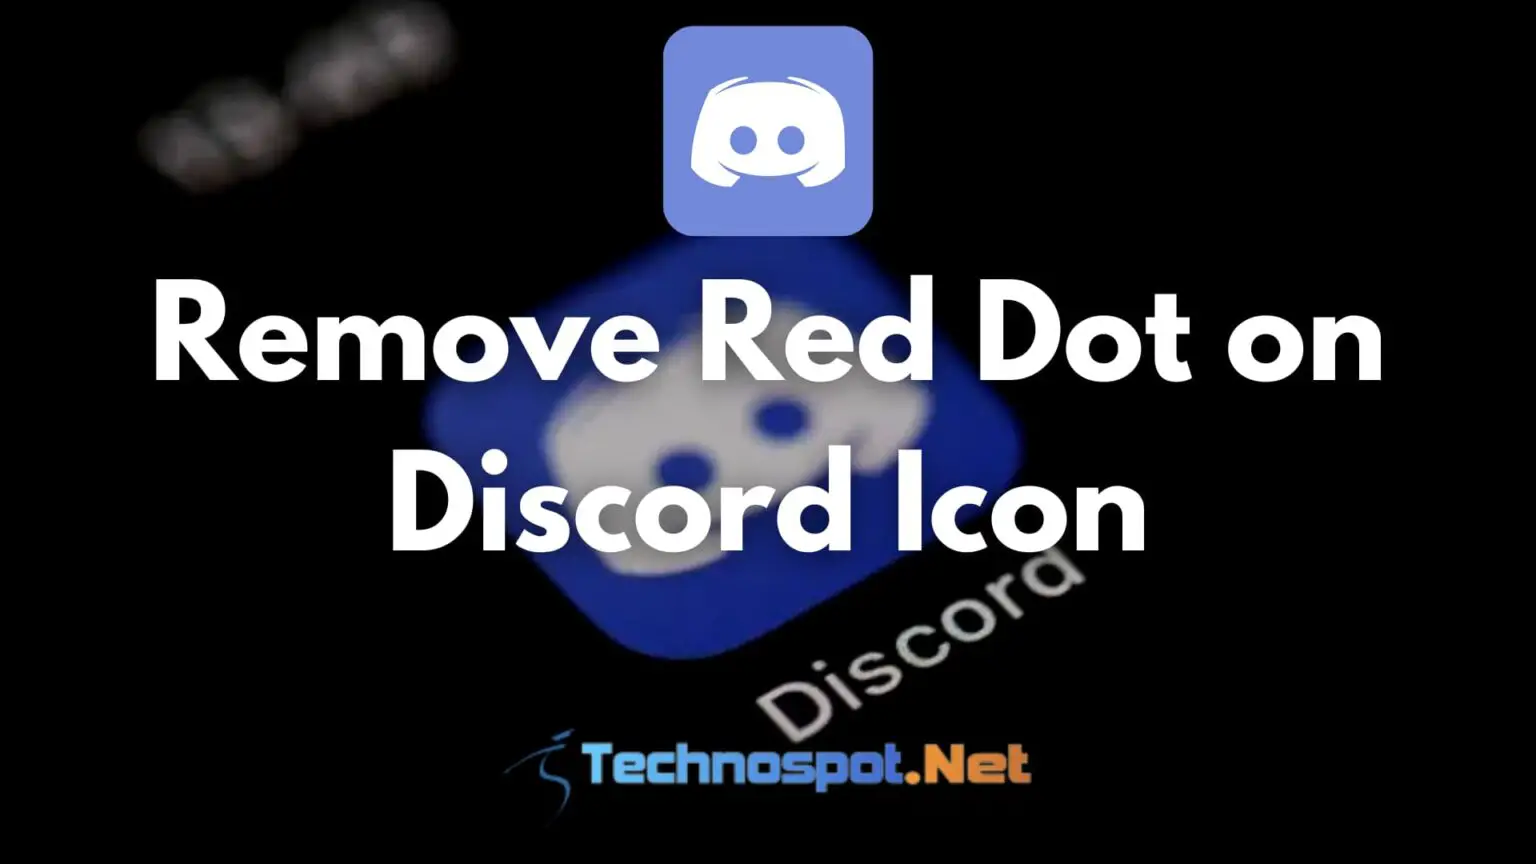 How to Remove the Red Dot on the Discord Icon?